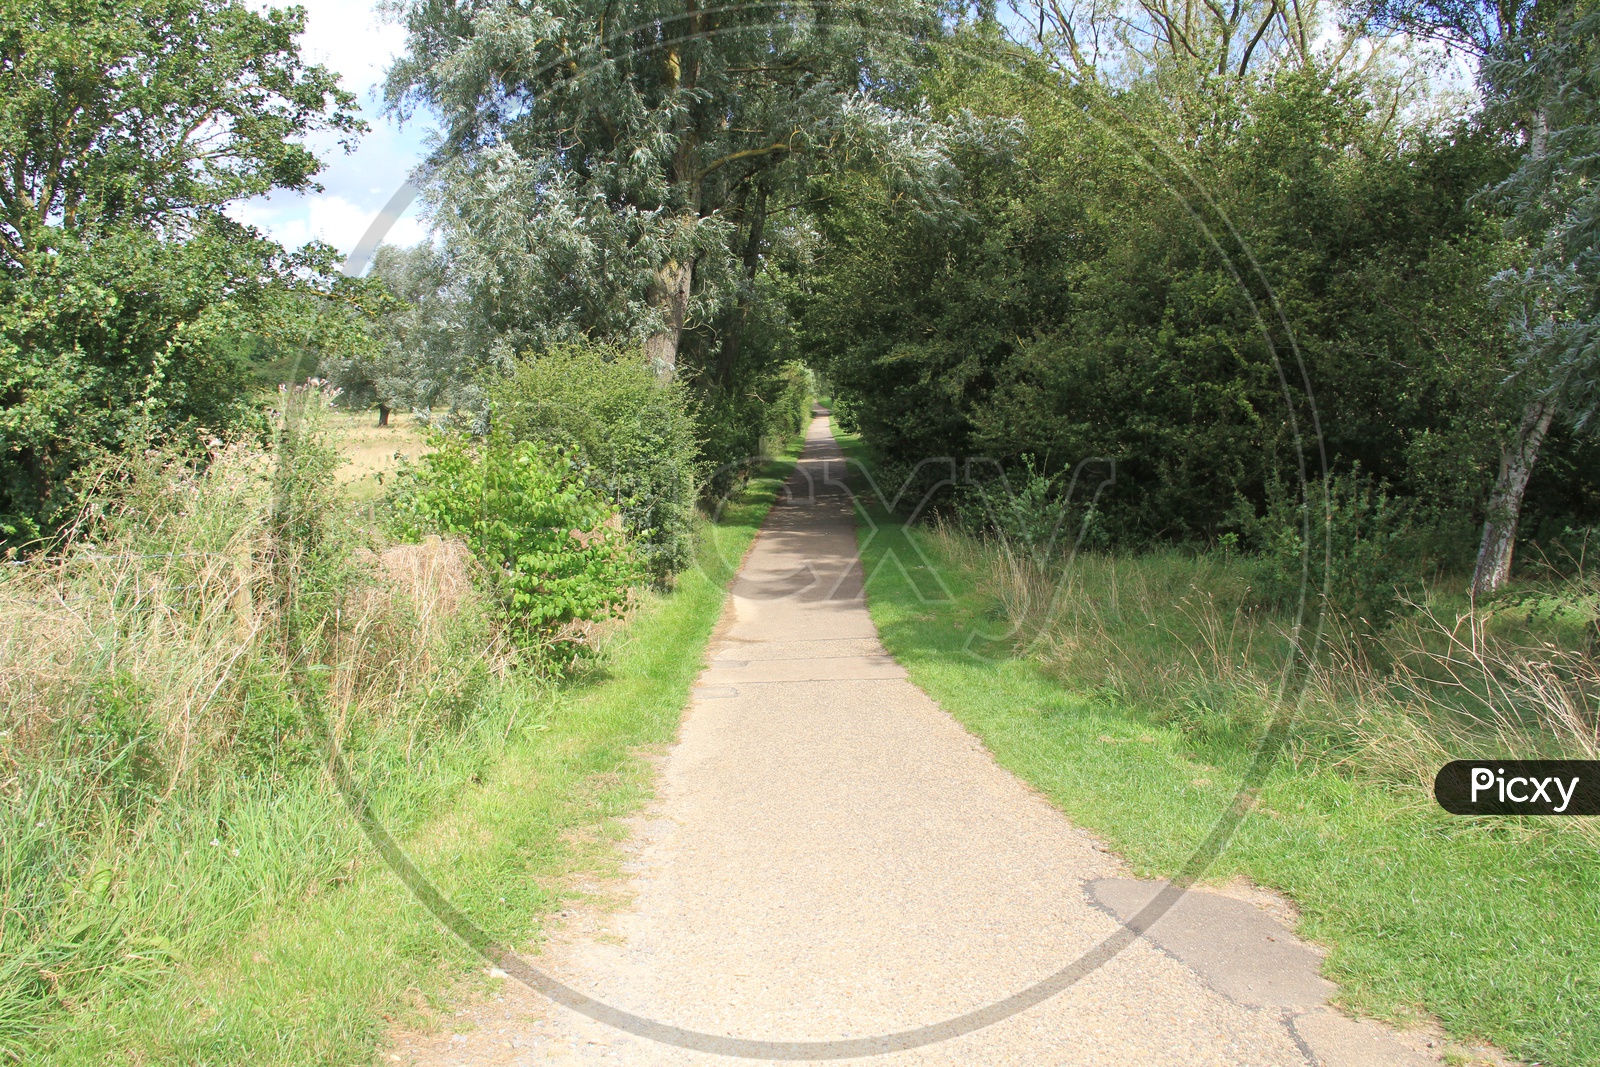 Narrow Pathway with Trees Both sides